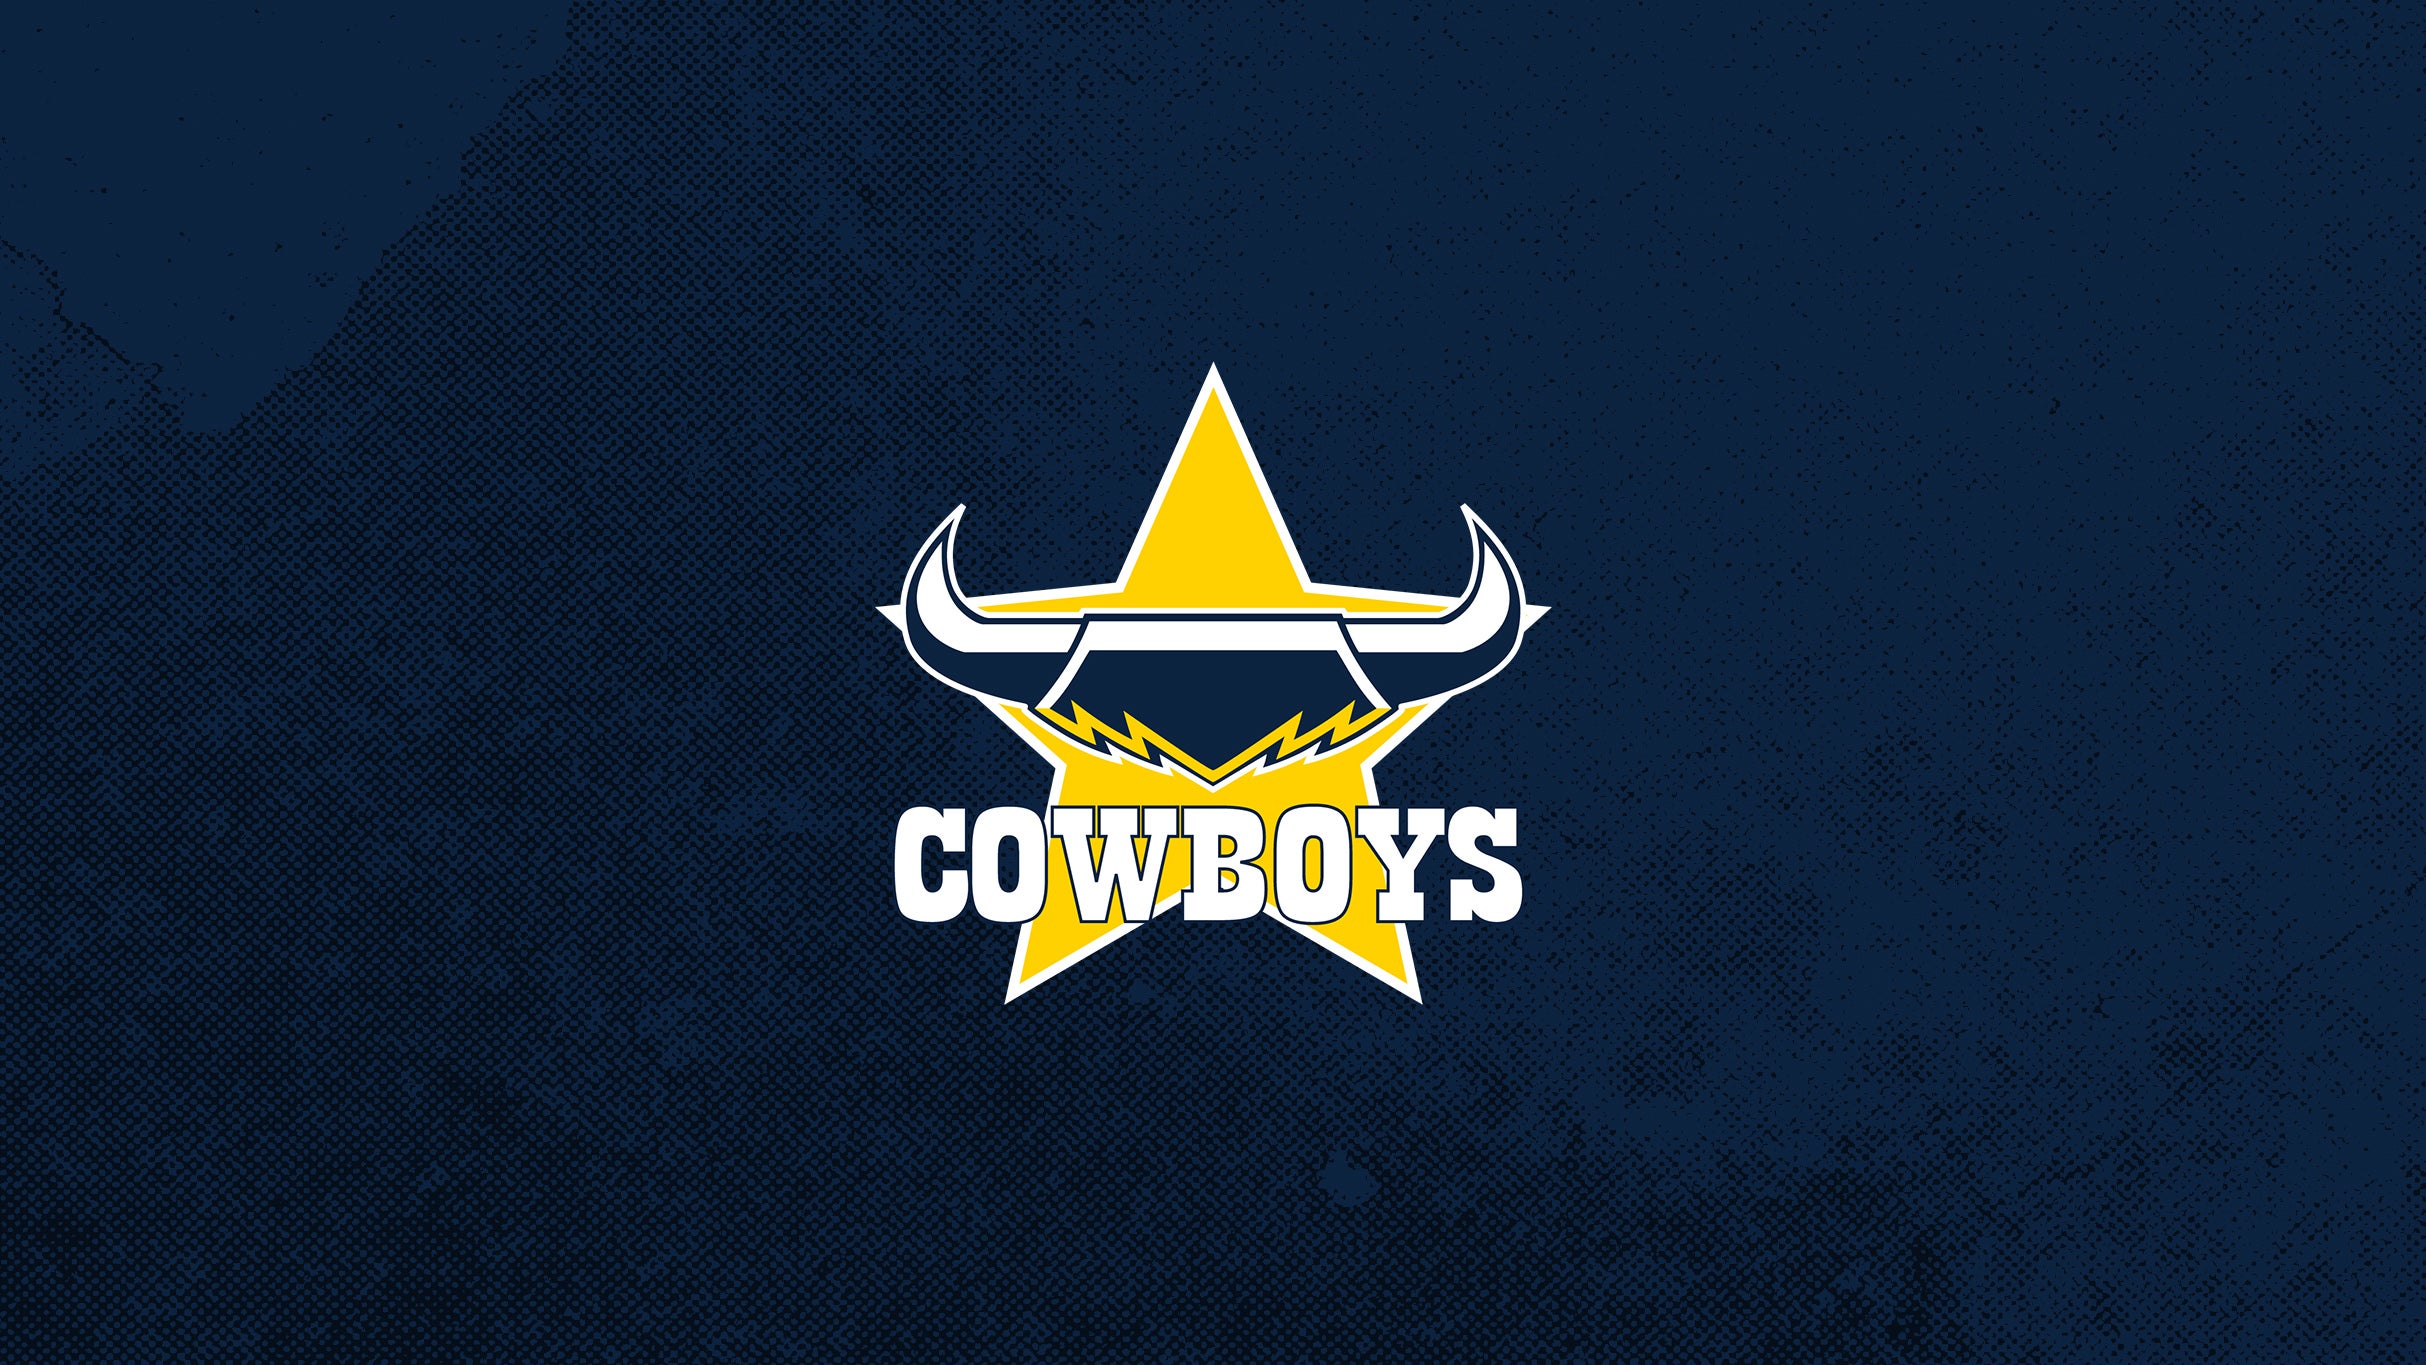 North Queensland Toyota Cowboys v Wests Tigers (Round 18) in Townsville promo photo for Council presale offer code